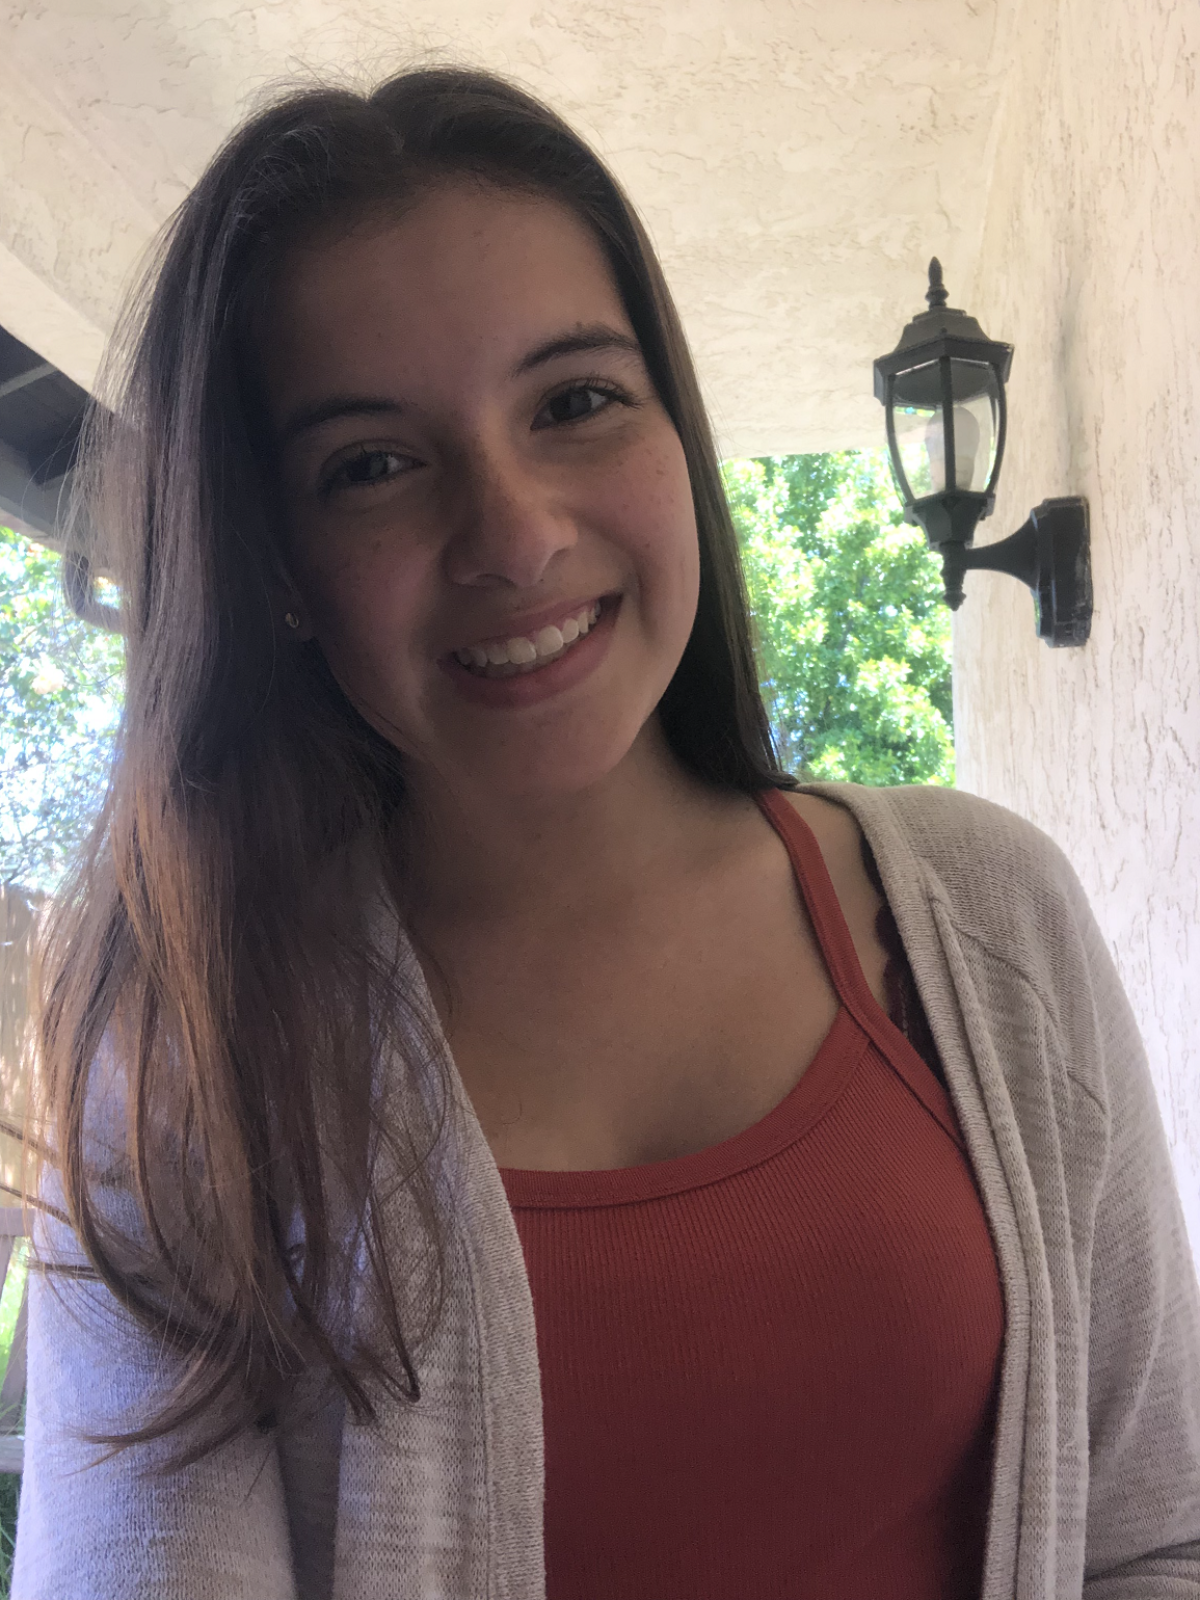 GFWC Contemporary Women of North County awarded a $2,000 scholarship to Maddison Smith, a student at MiraCosta College.